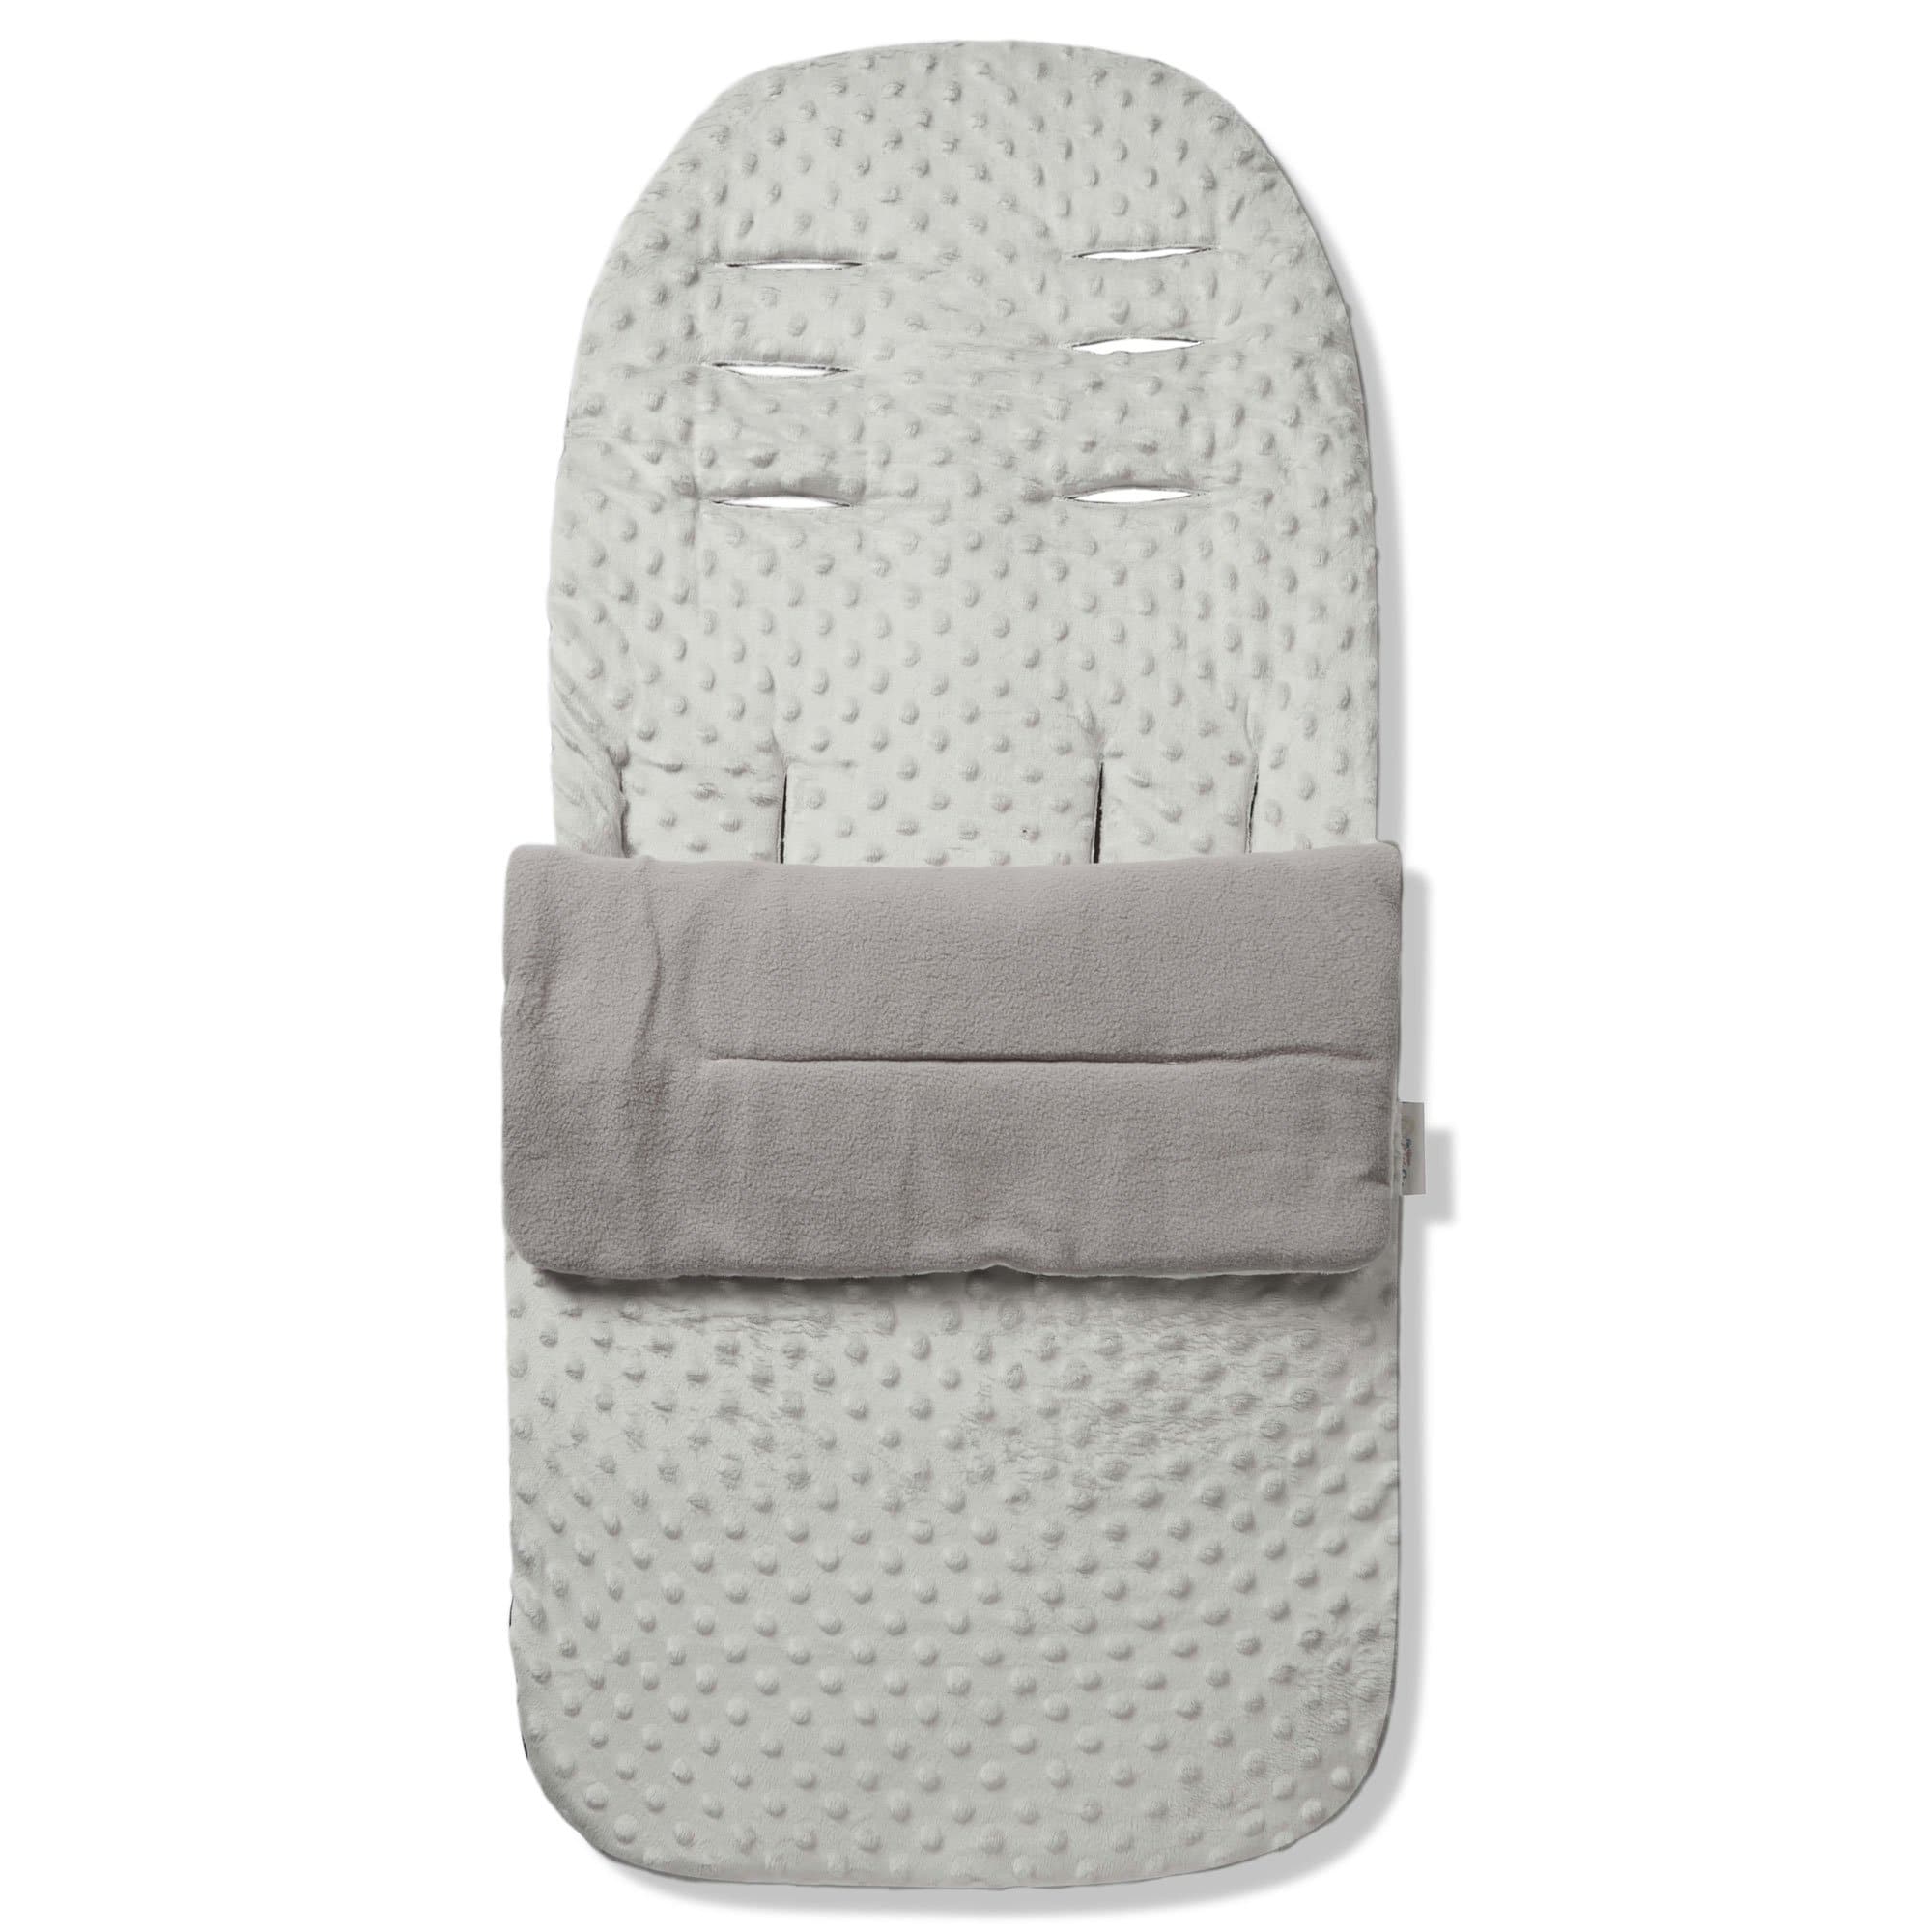 Dimple Footmuff / Cosy Toes Compatible with Zooper - Grey / Fits All Models | For Your Little One